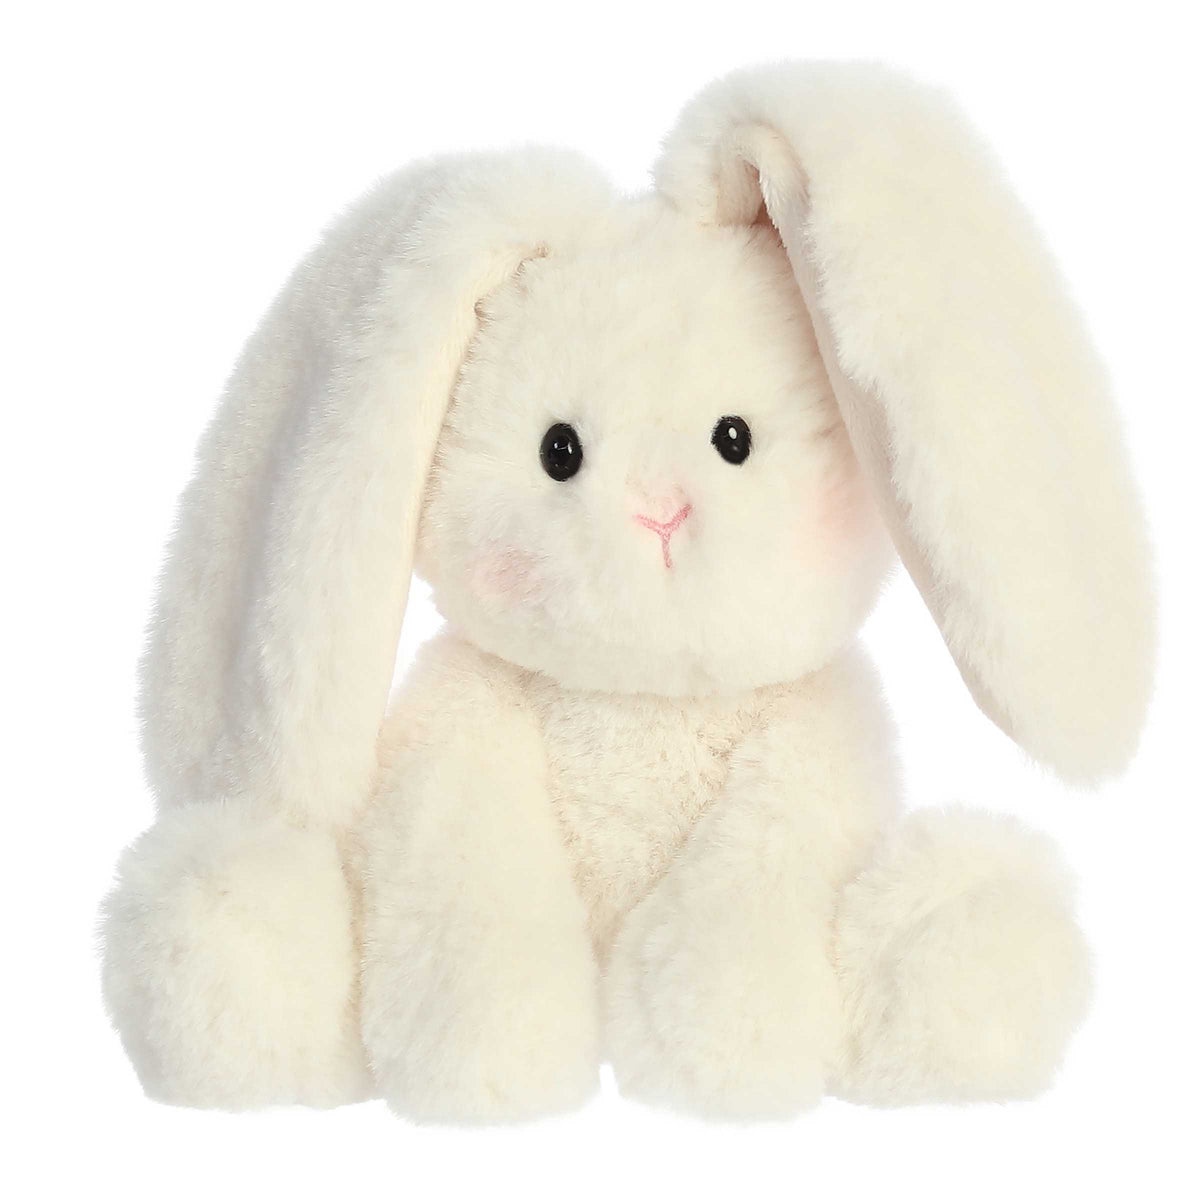 Cream Candy Cottontail plush with soft cream fur and a kind-faced expression, Candy Cottontails bunny plush collection